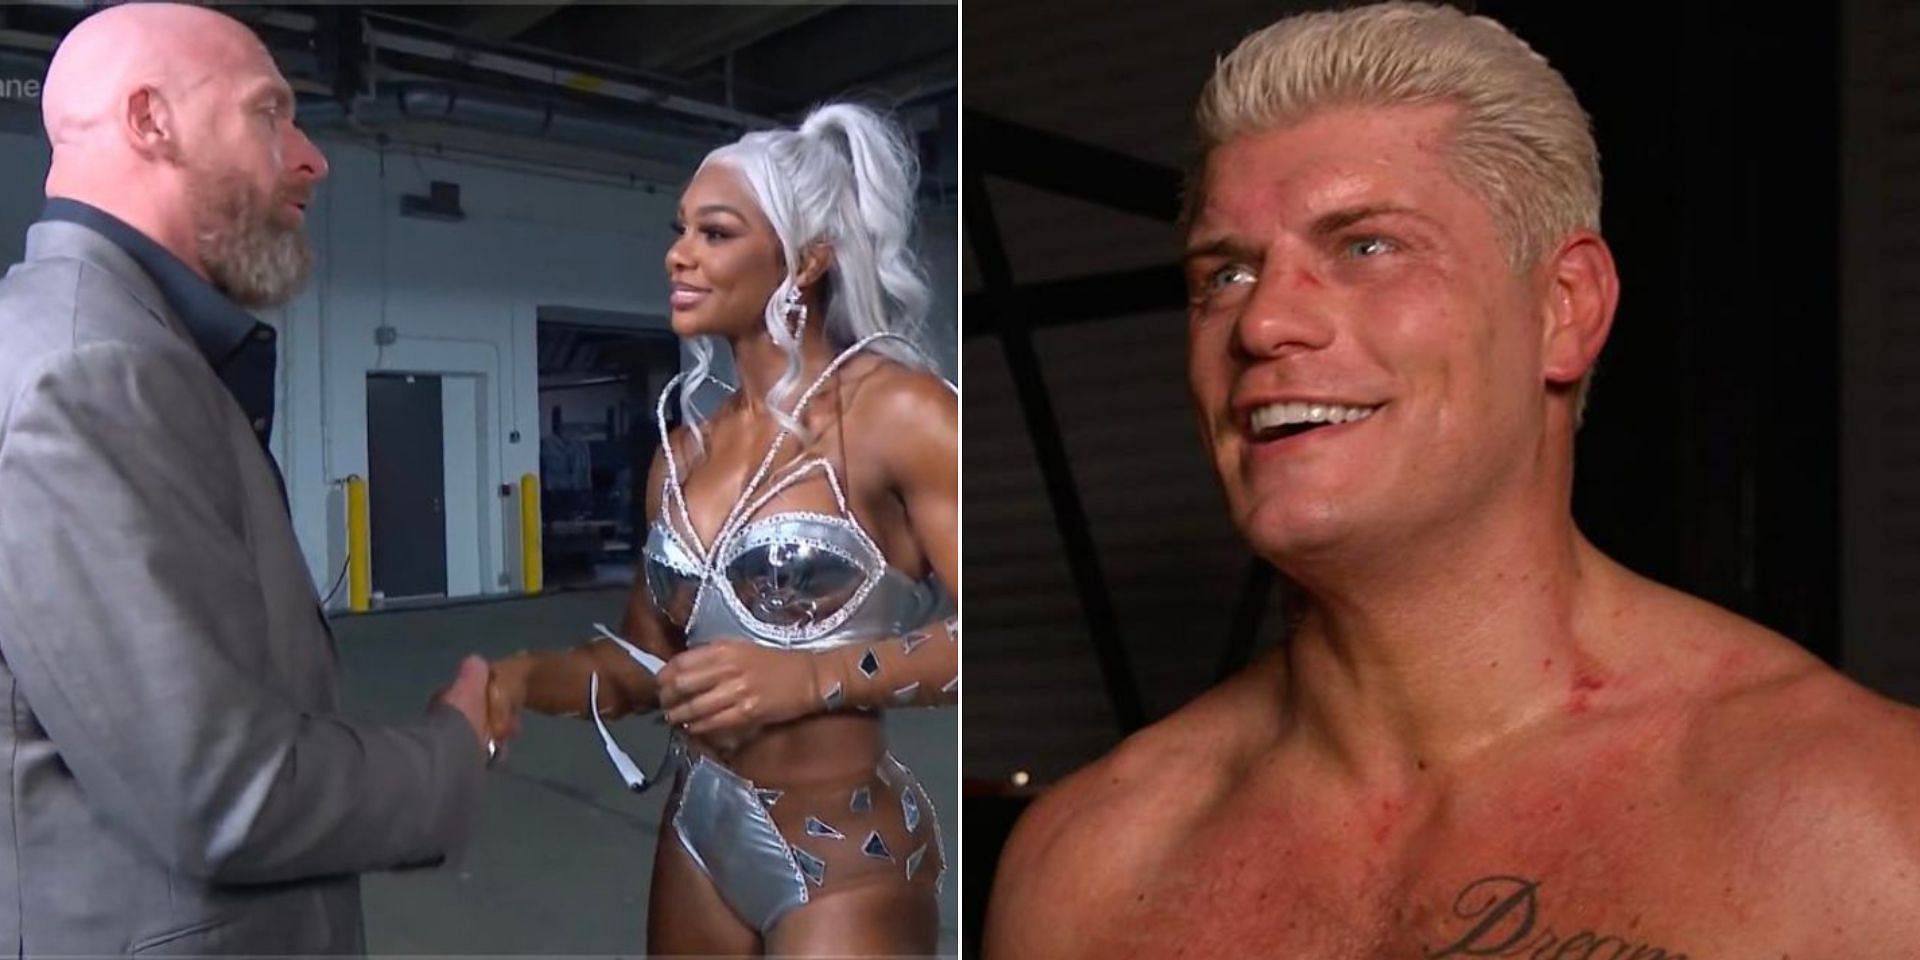 Cody Rhodes has commented on Jade Cargill joining WWE